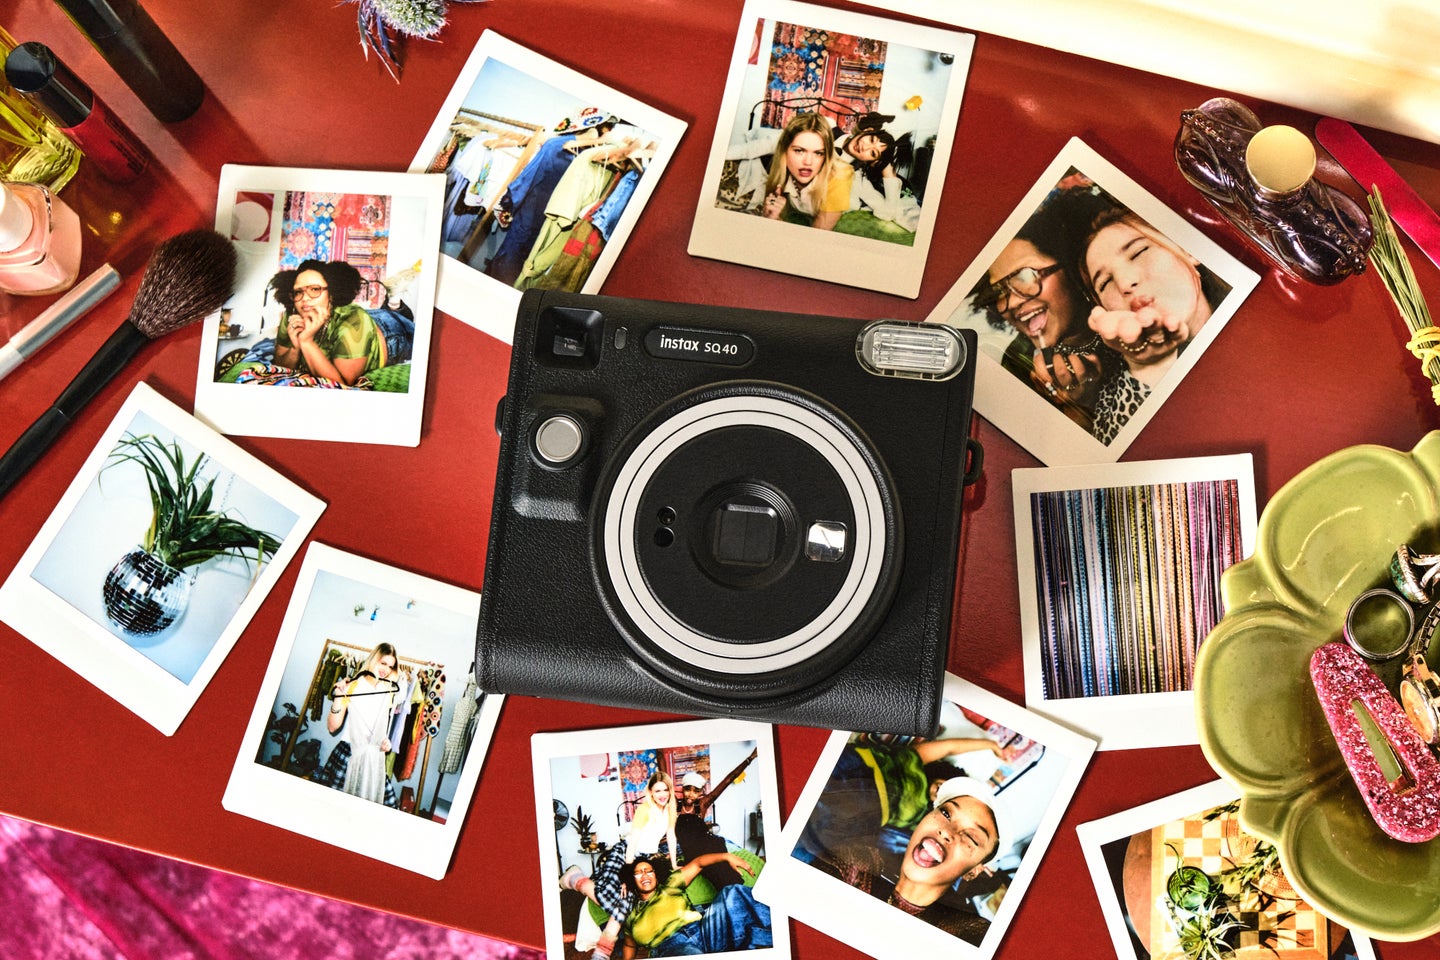 Fujifilm Instax SQ40 instant film camera surrounded by prints